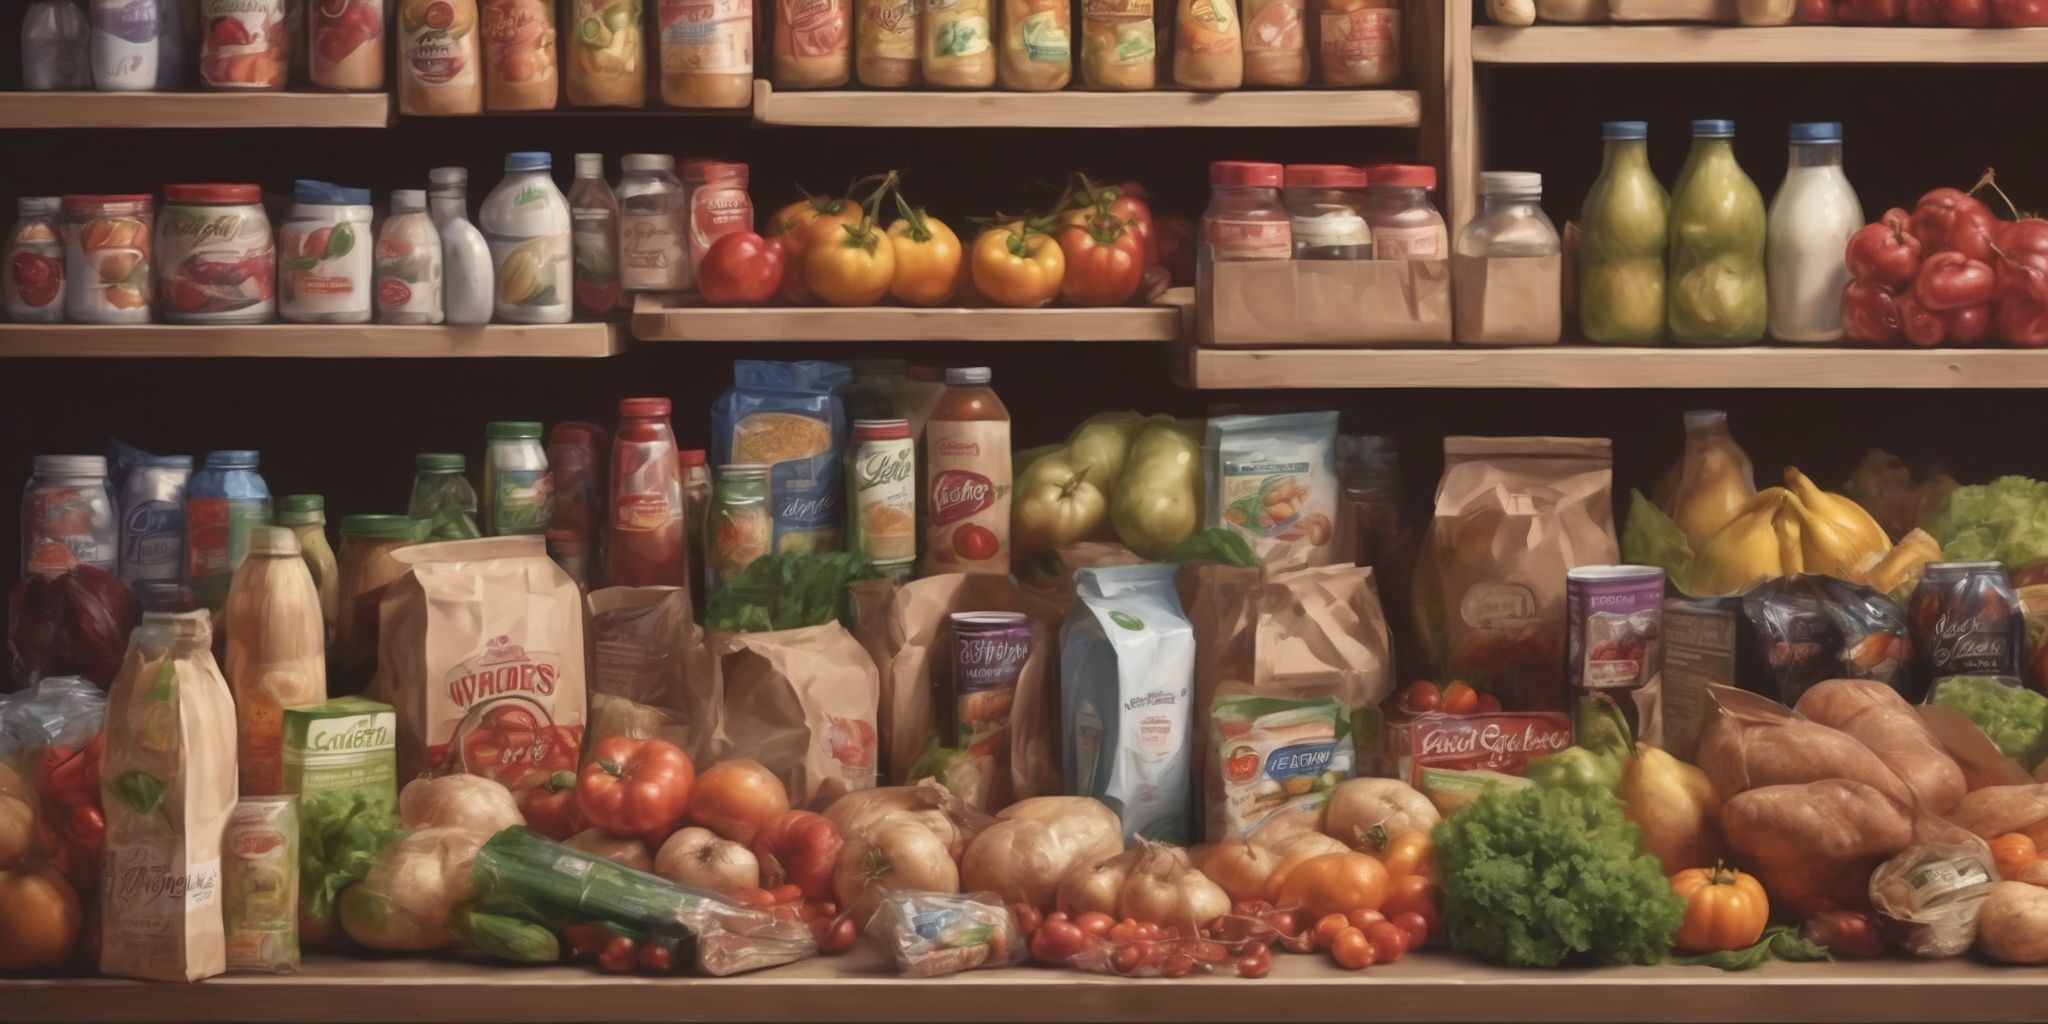 Groceries  in realistic, photographic style